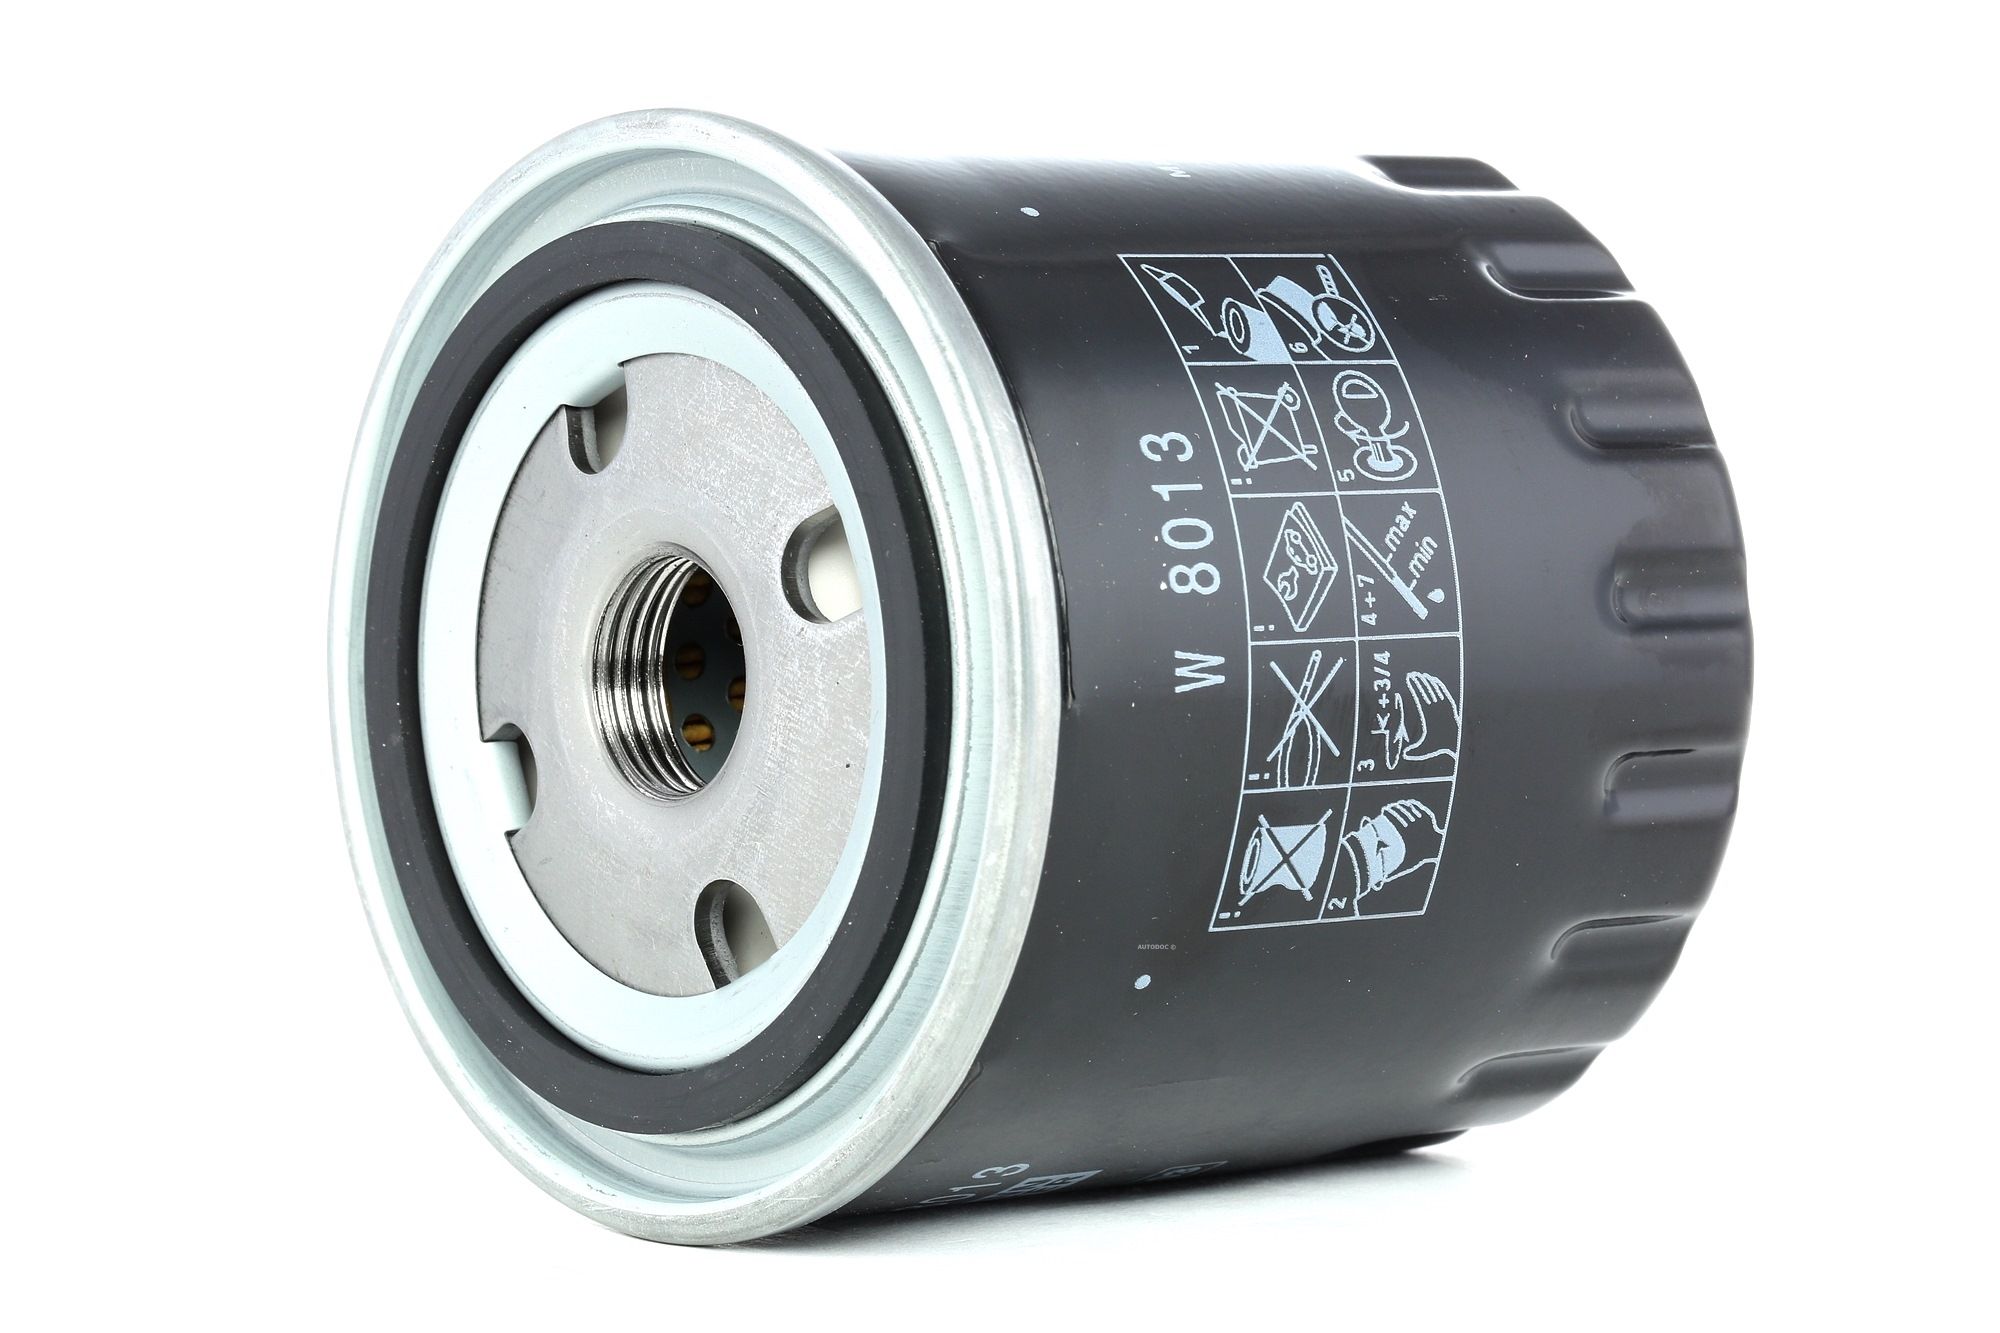 W 8013 MANN-FILTER Oil filters RENAULT M 20 X 1.5, with one anti-return valve, Spin-on Filter